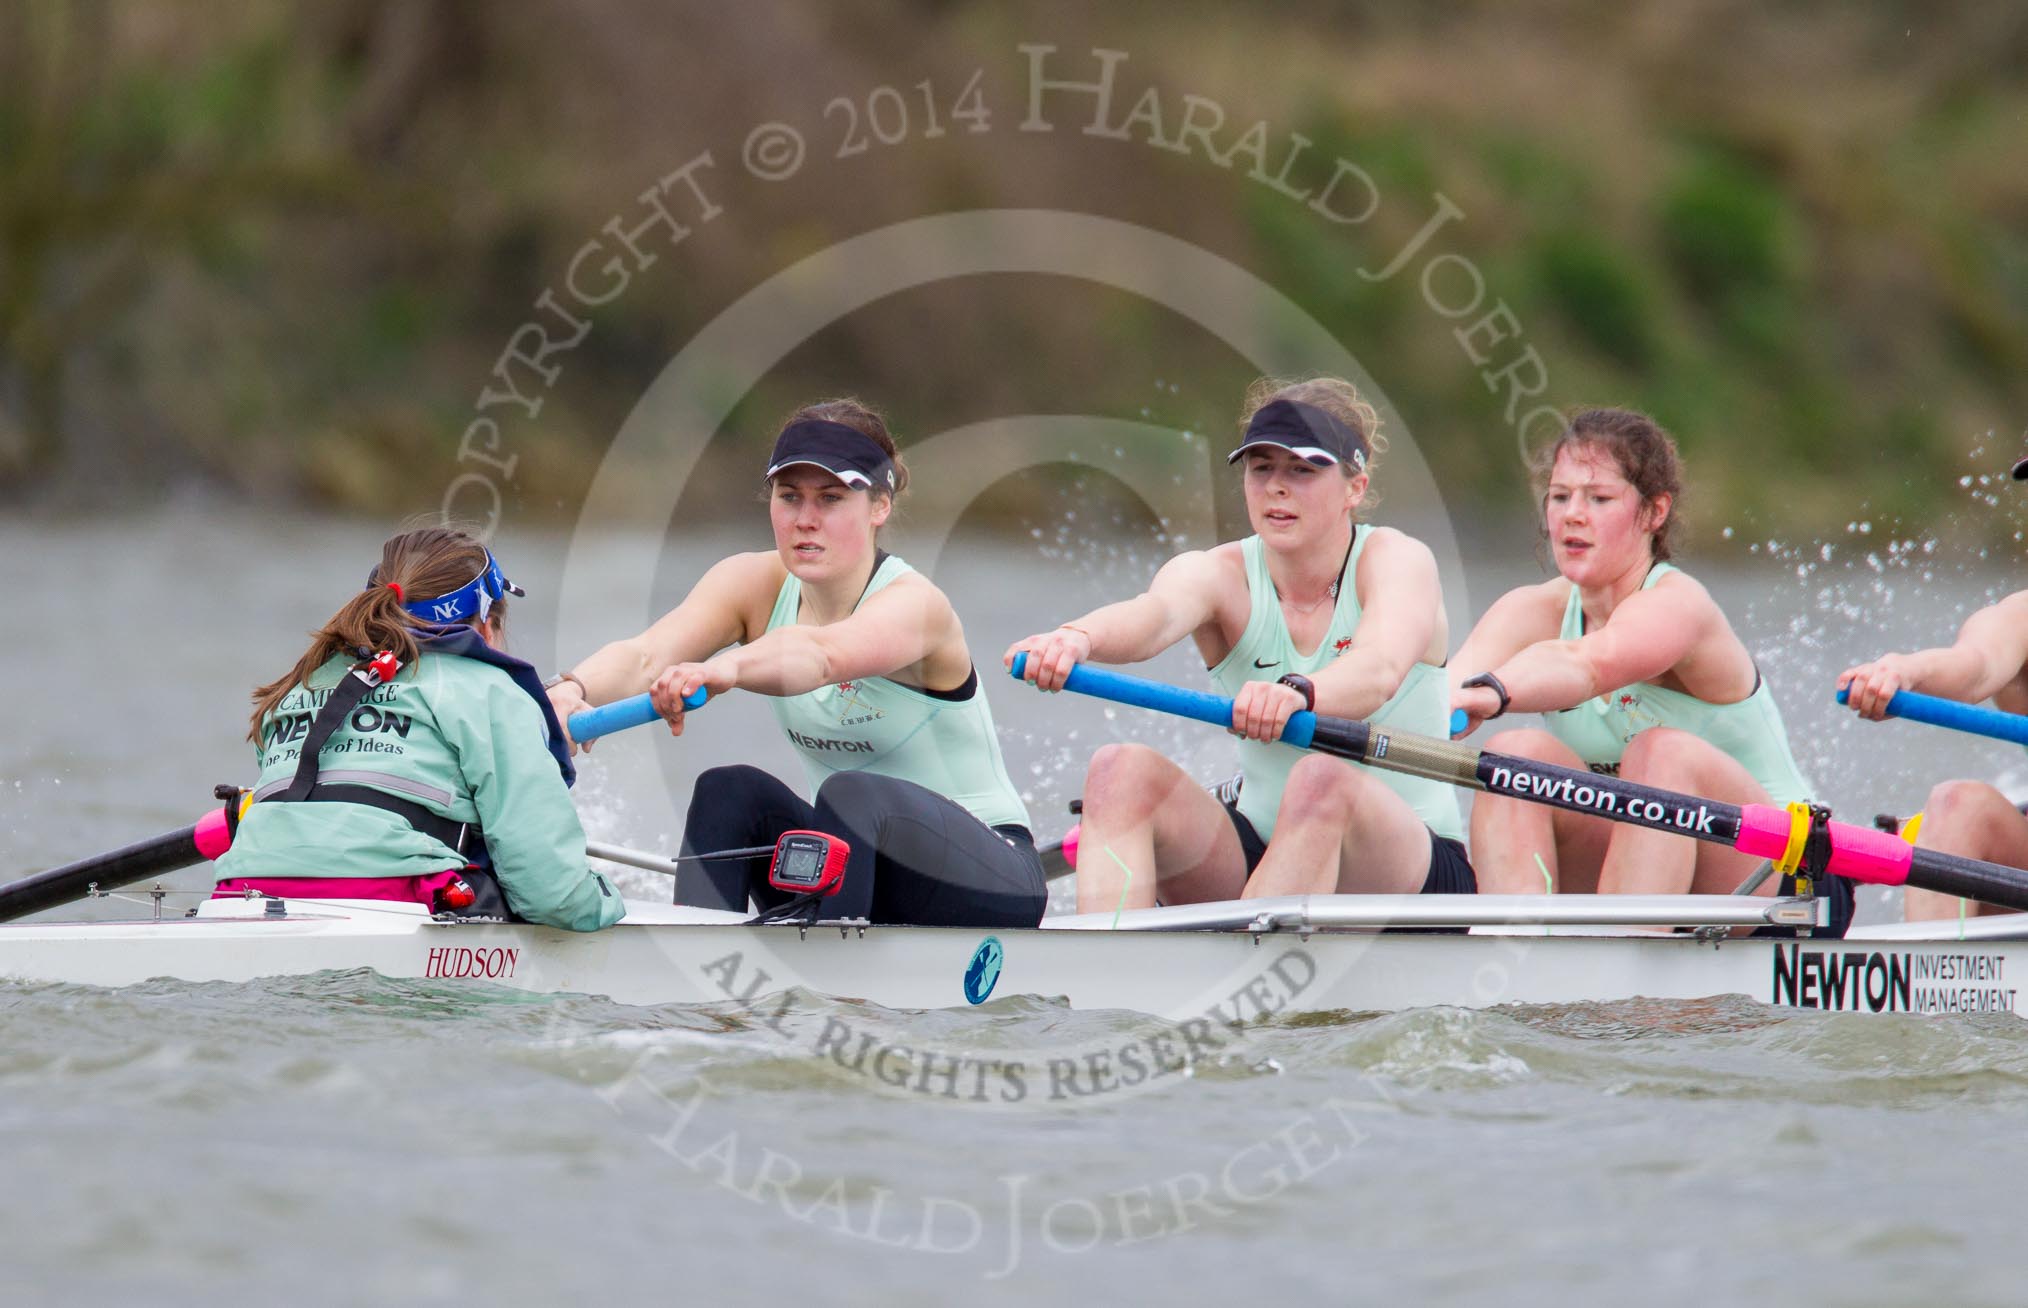 The Boat Race season 2014 - fixture CUWBC vs Thames RC: In the Cambridge boat cox Esther Momcilovic, stroke Emily Day, 7 Claire Watkins, 6 Melissa Wilson..




on 02 March 2014 at 13:17, image #119